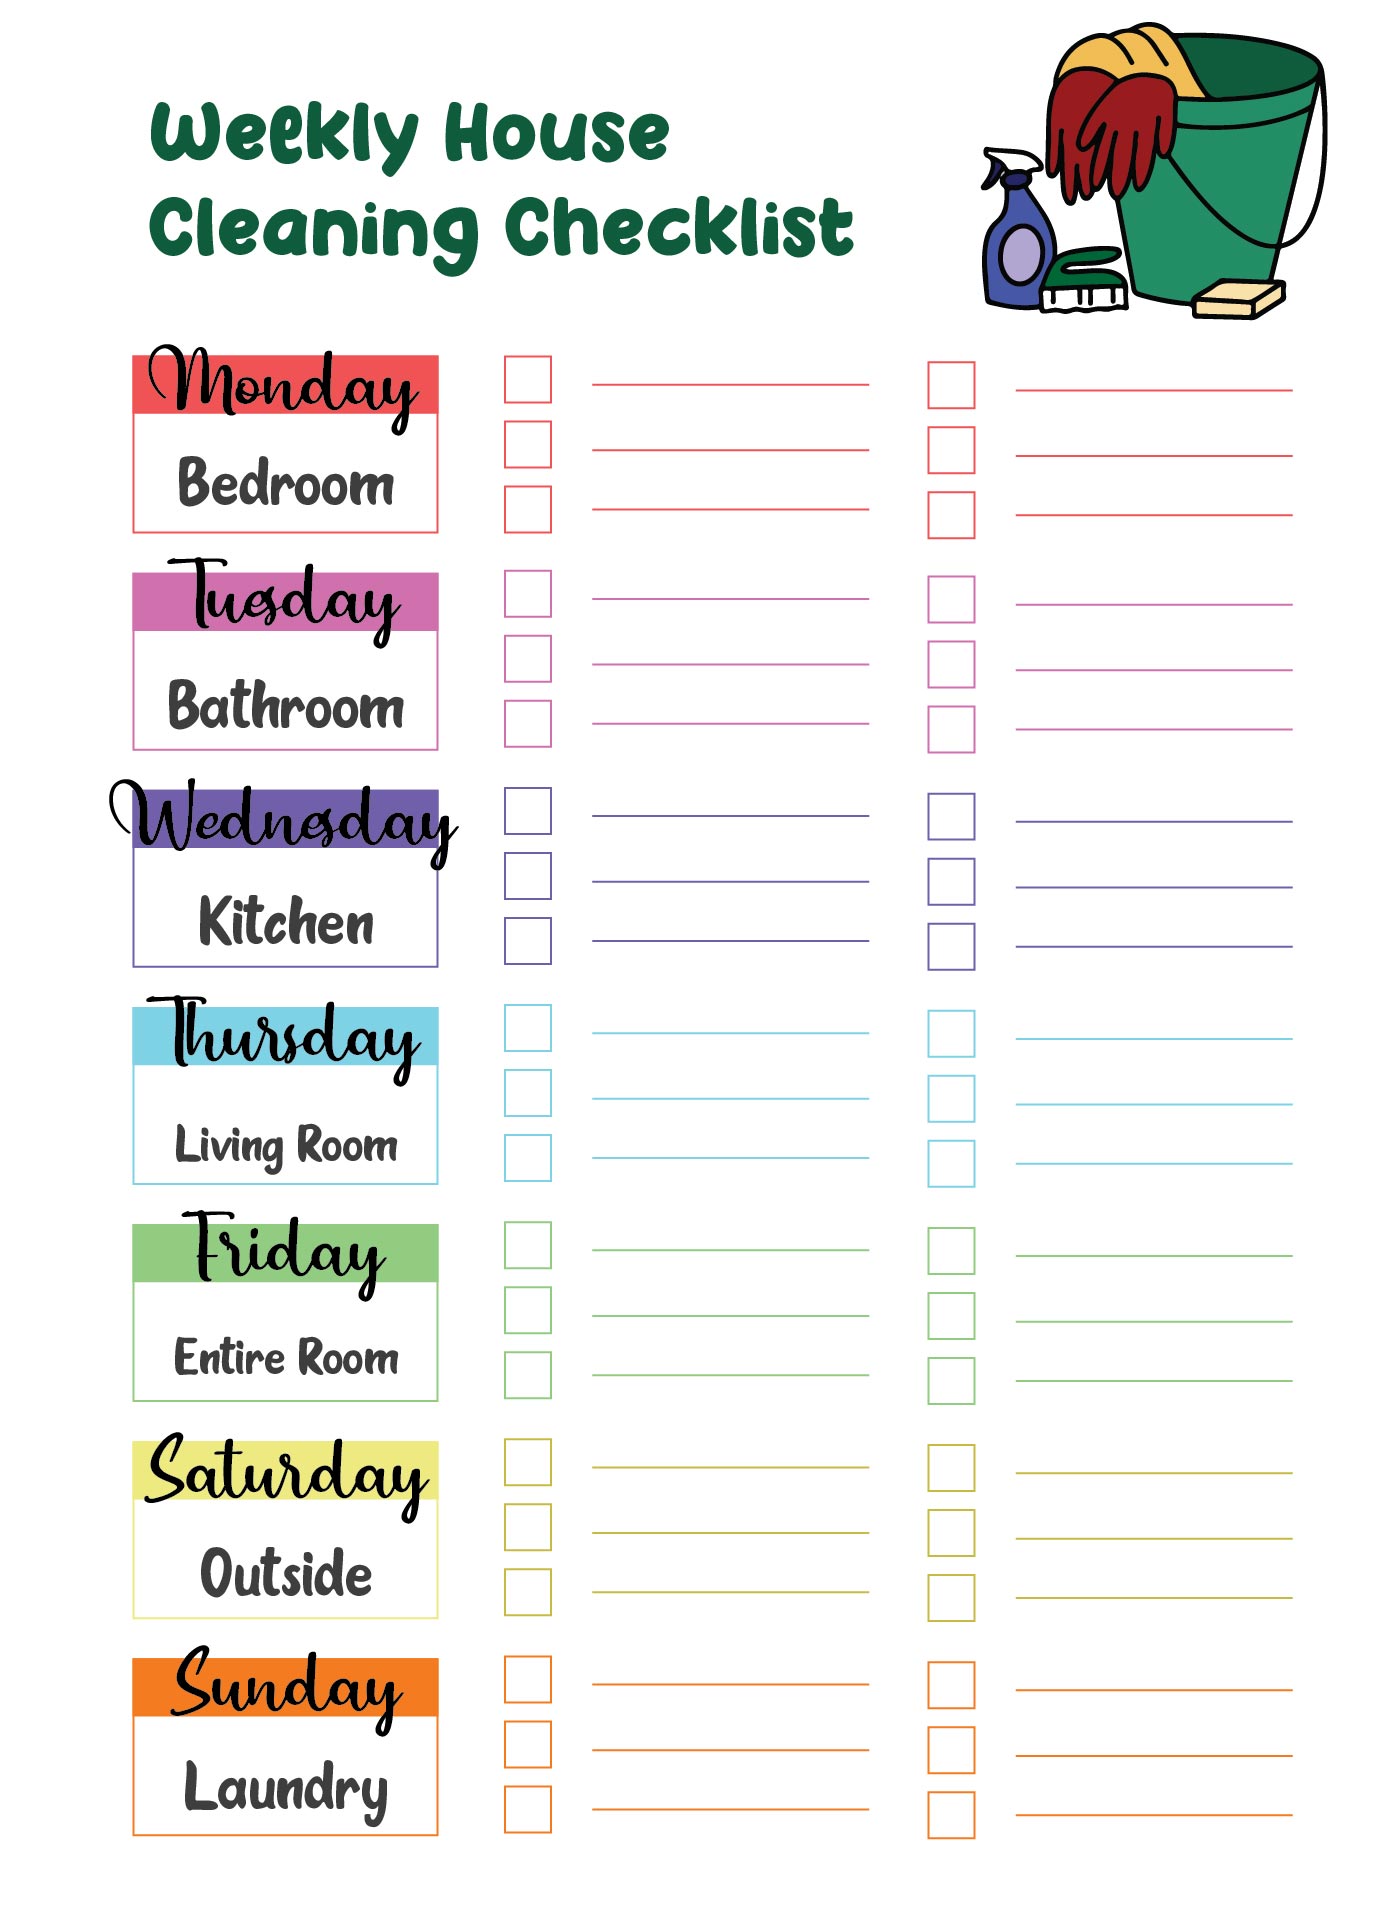 daily-weekly-monthly-cleaning-checklist-printable